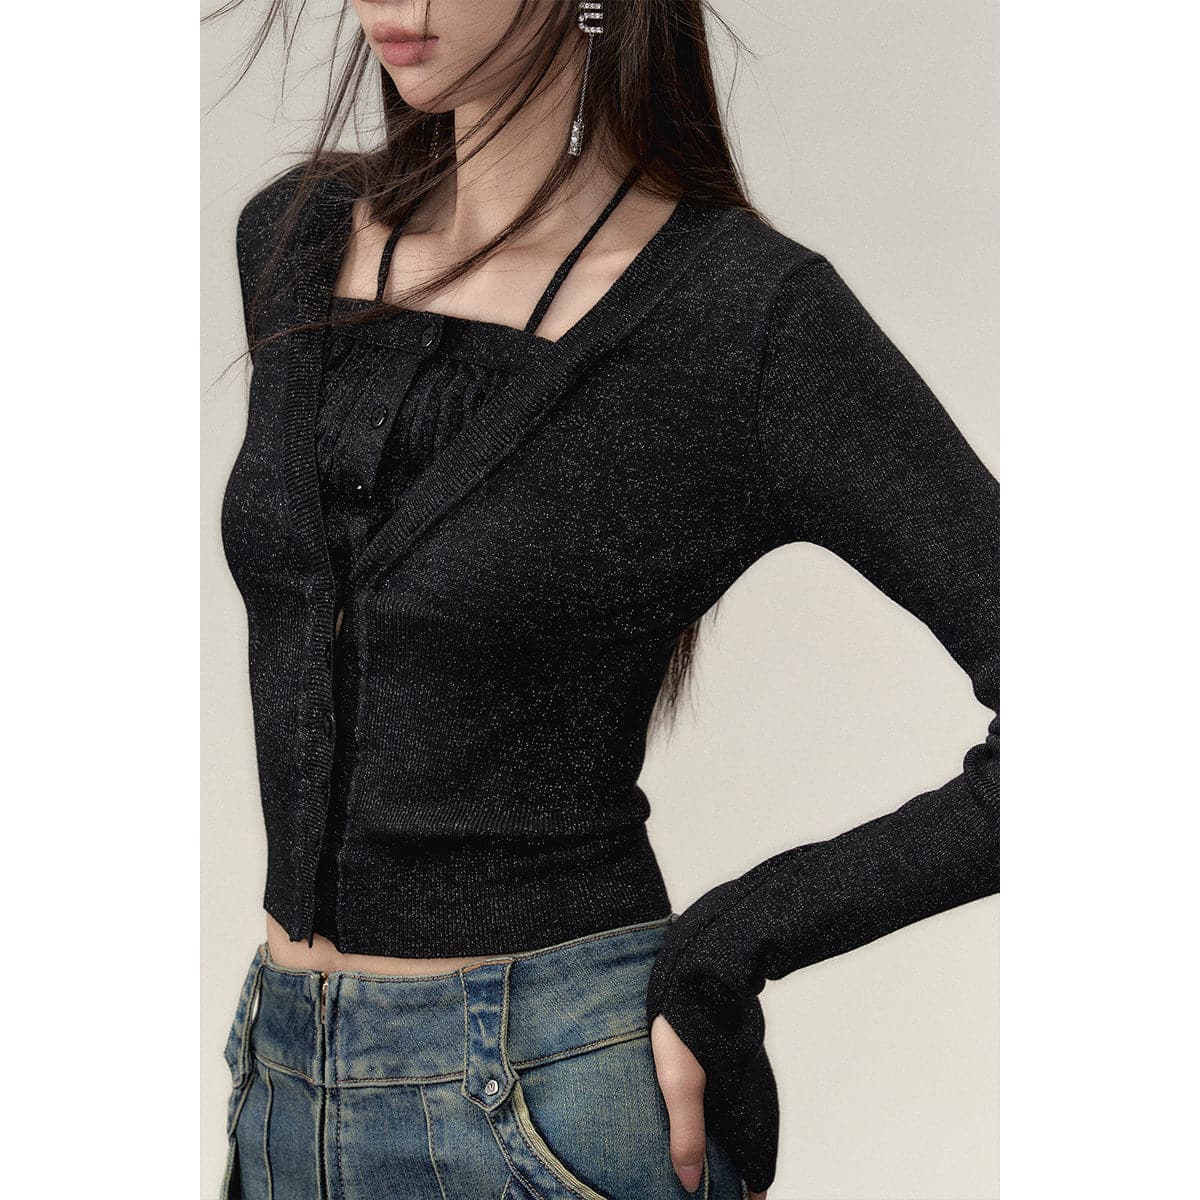 Elegant Black Knit Top With Faux Two-Piece Design - chiclara